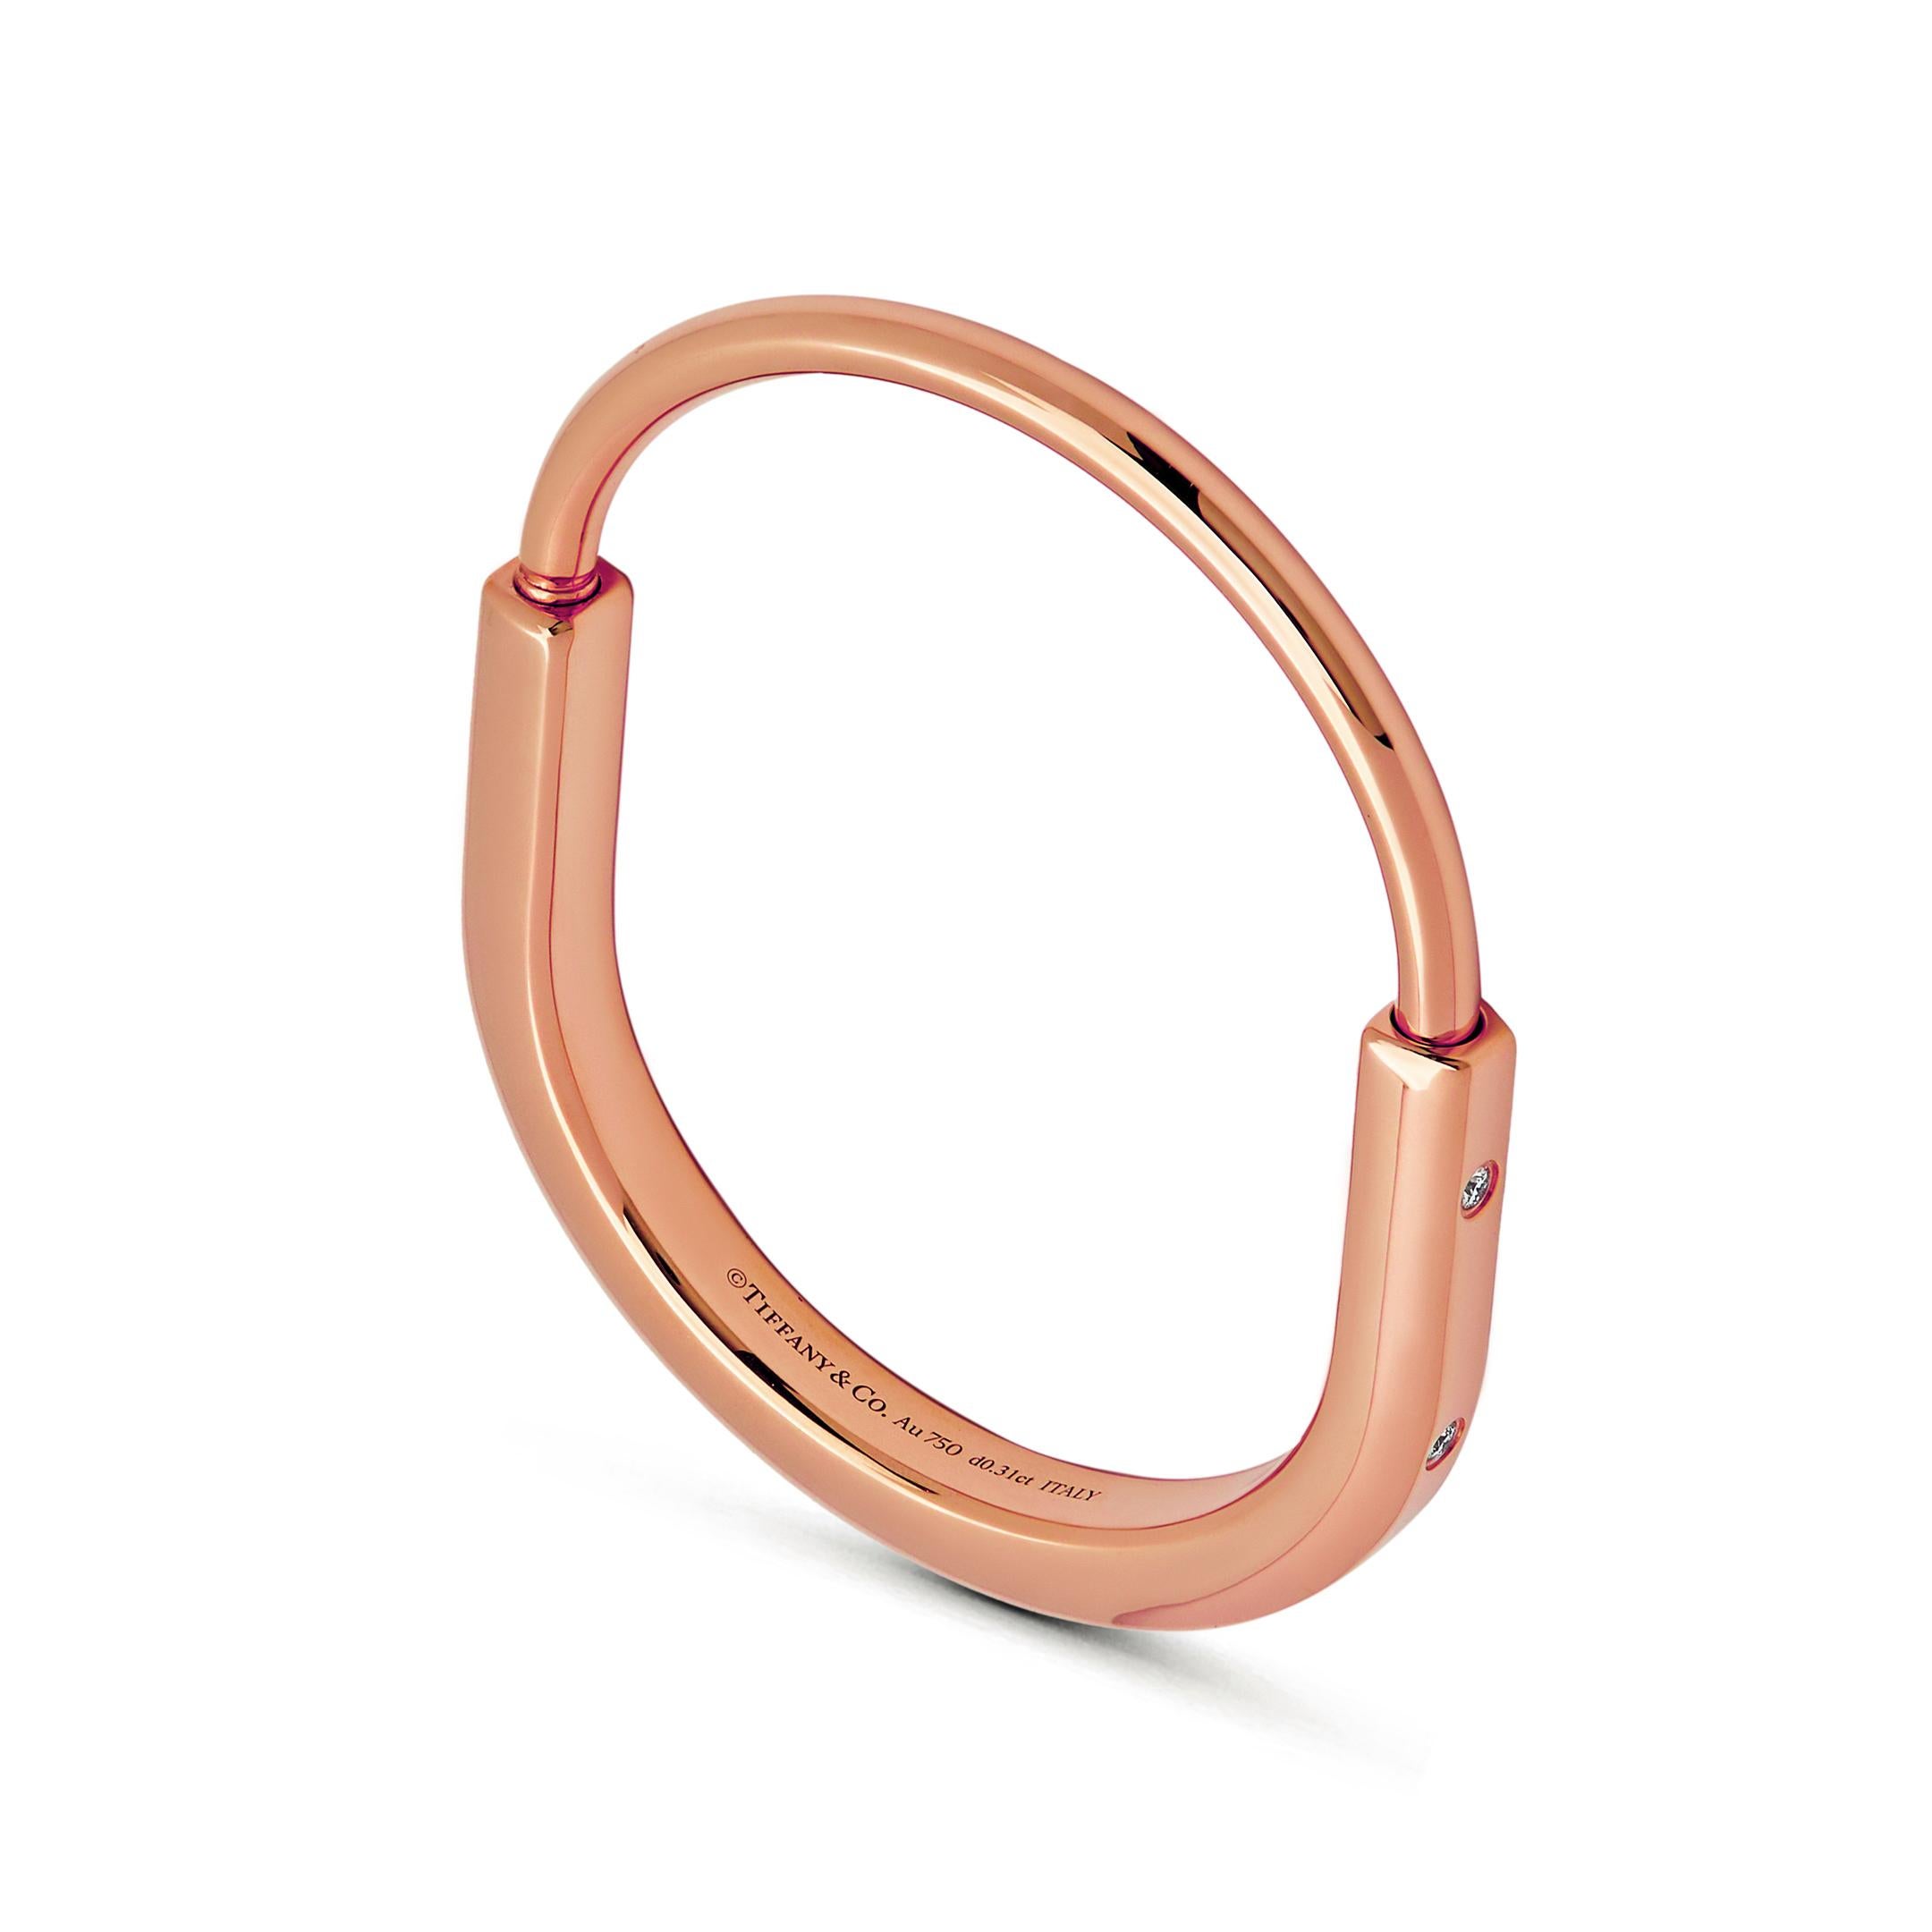 Tiffany & Co. Lock Bangle in Rose Gold with Diamond Accents 70185296 For Sale 1